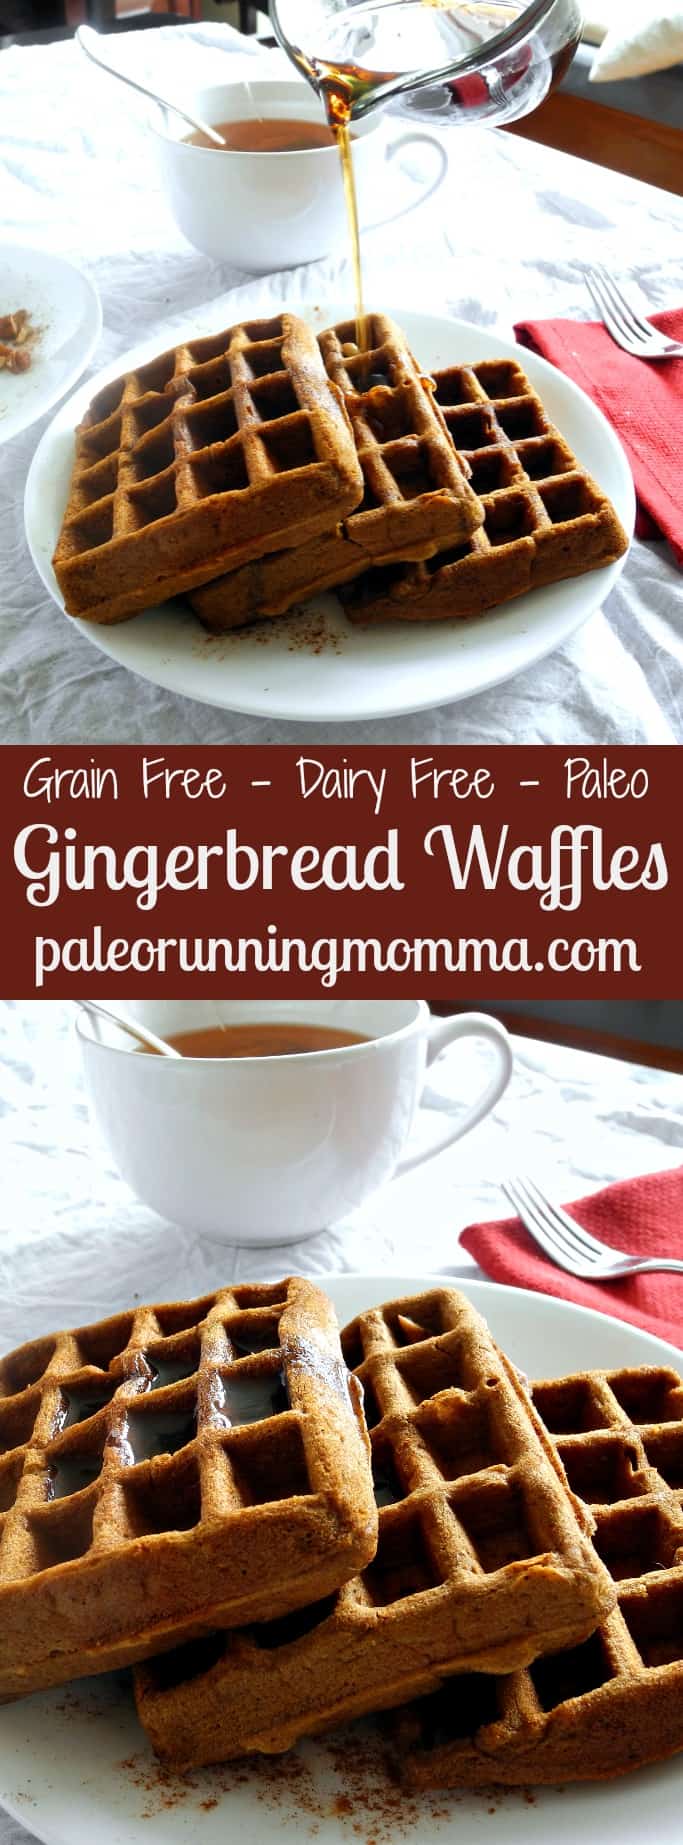 Grain Free, Dairy Free, Paleo Gingerbread Waffles @paleorunmomma - These waffles are made with coconut and tapioca flour, sweetened with molasses and spiced with cinnamon, ginger and cloves